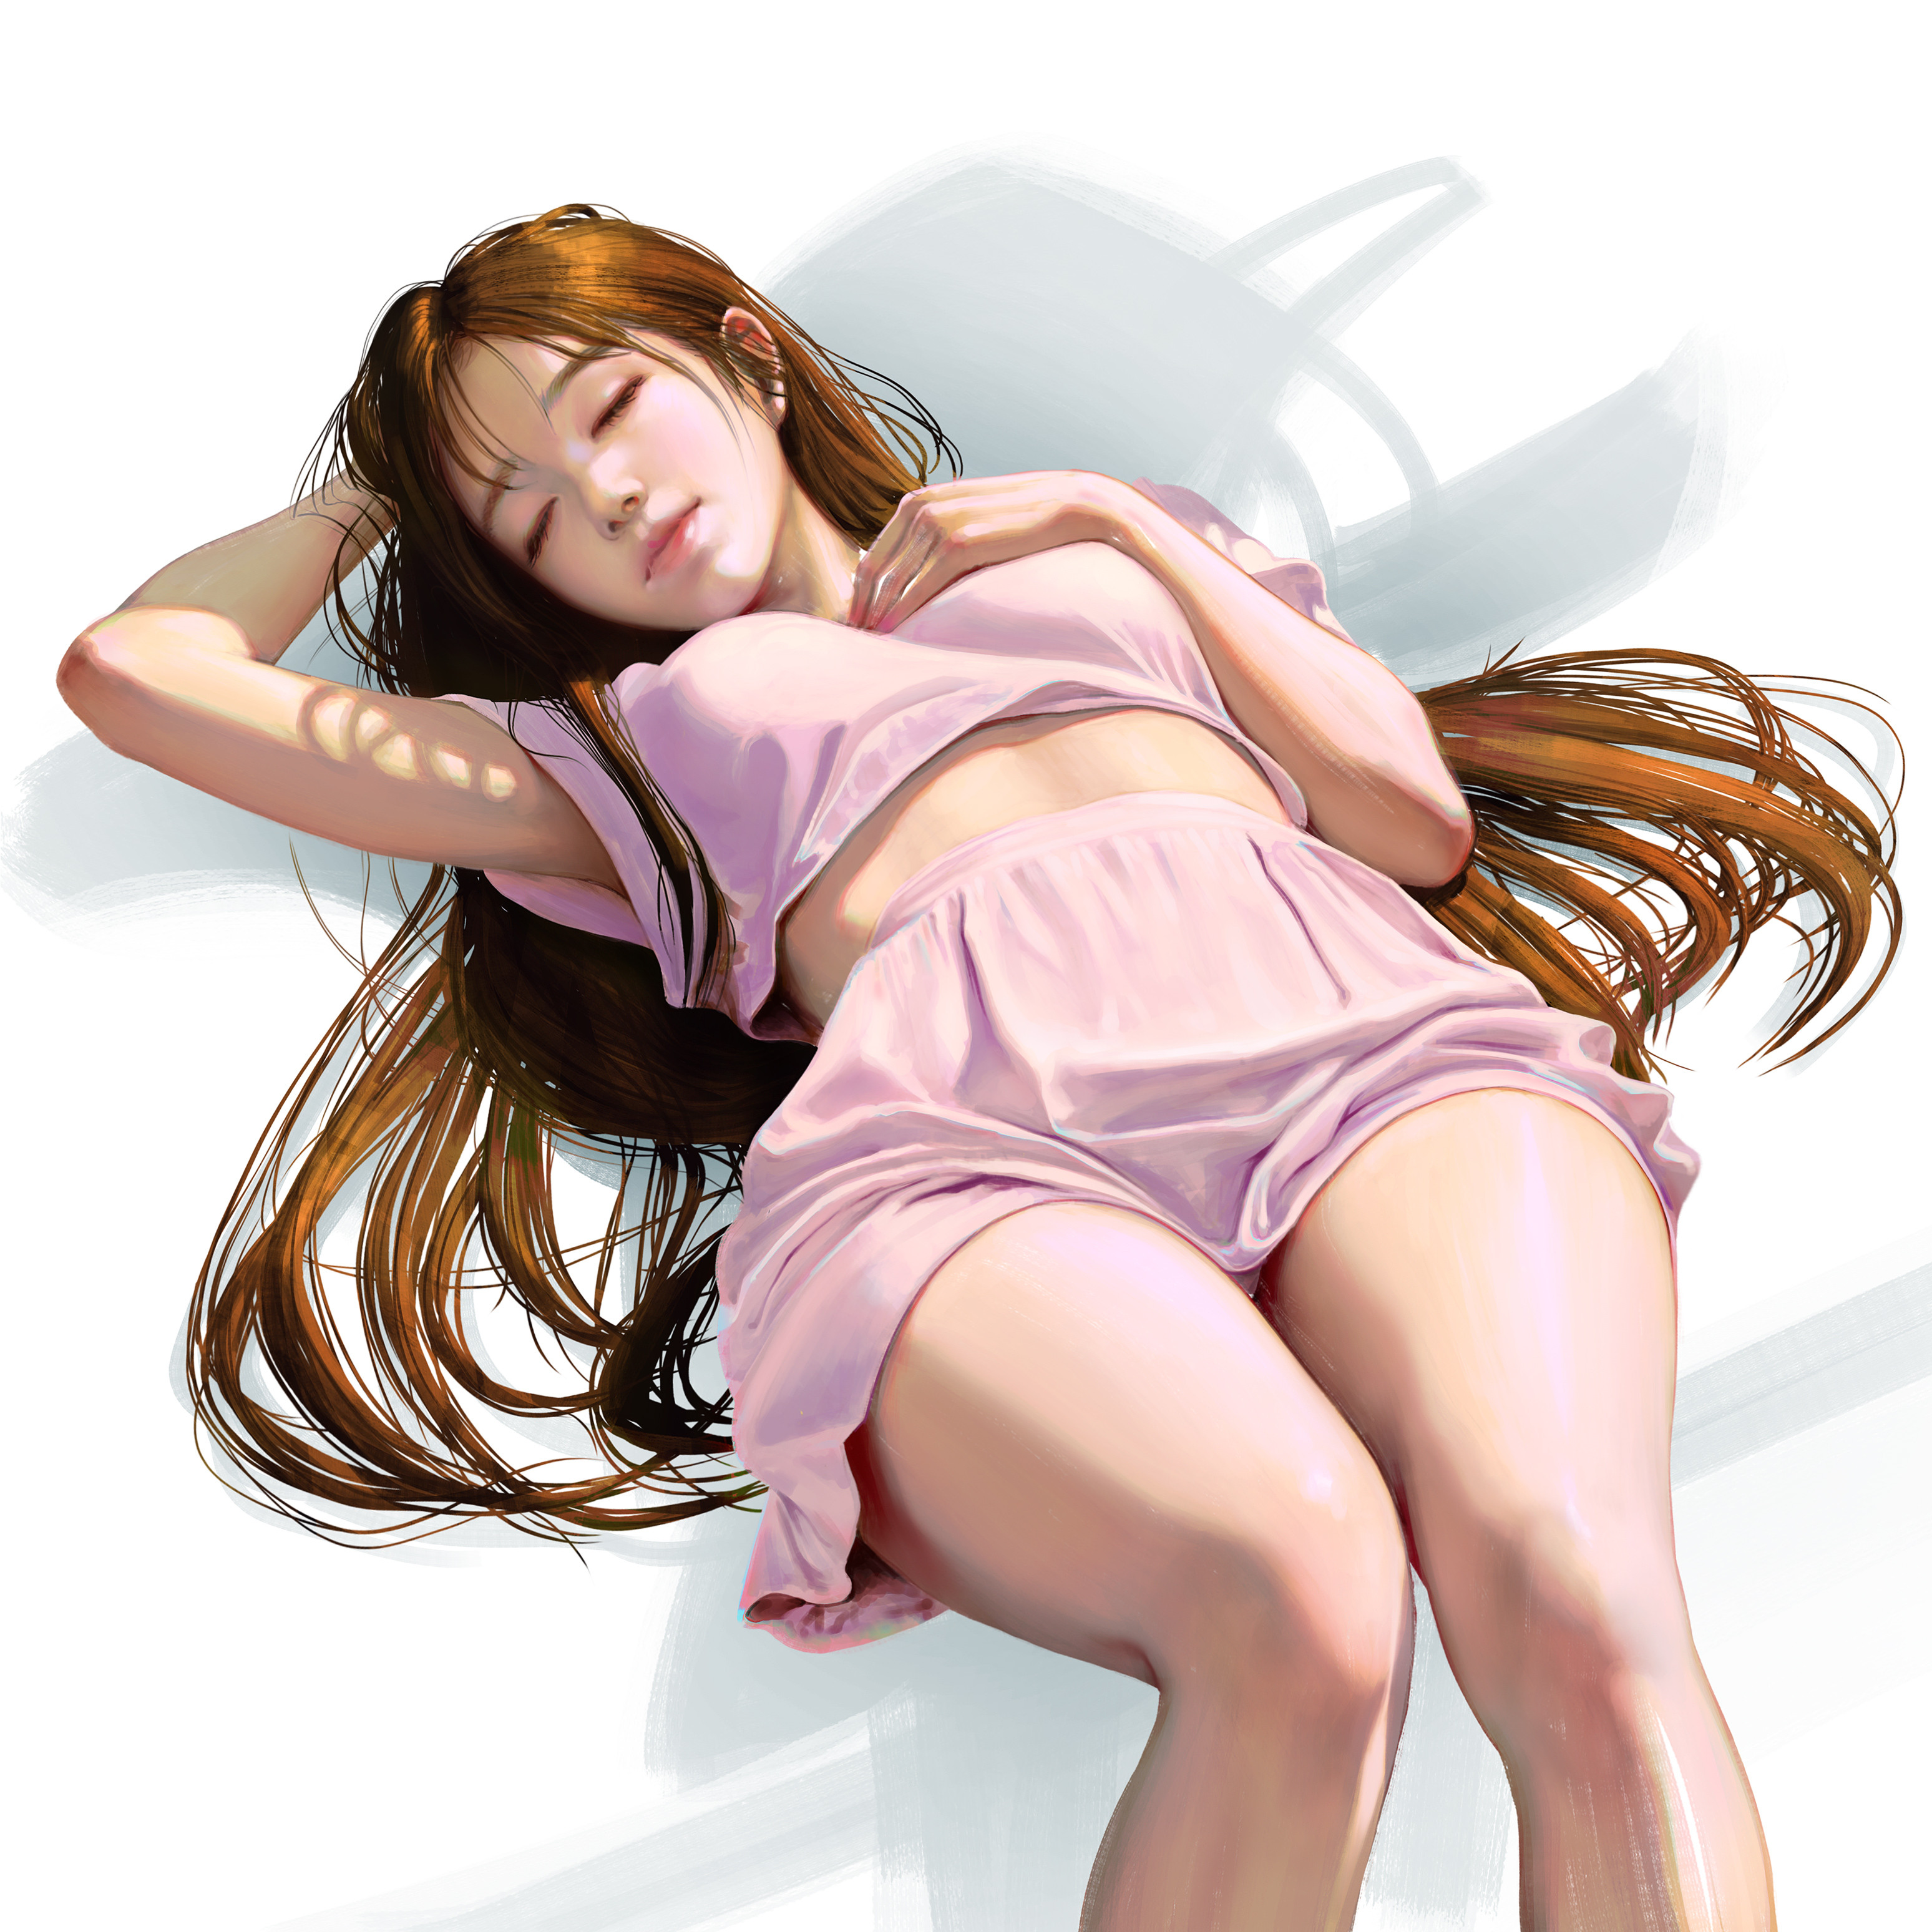 General 3096x3096 LightBox drawing women brunette sleeping white background portrait display digital art simple background legs pink clothing closed eyes closed mouth minimalism lying down lying on back long hair Asian